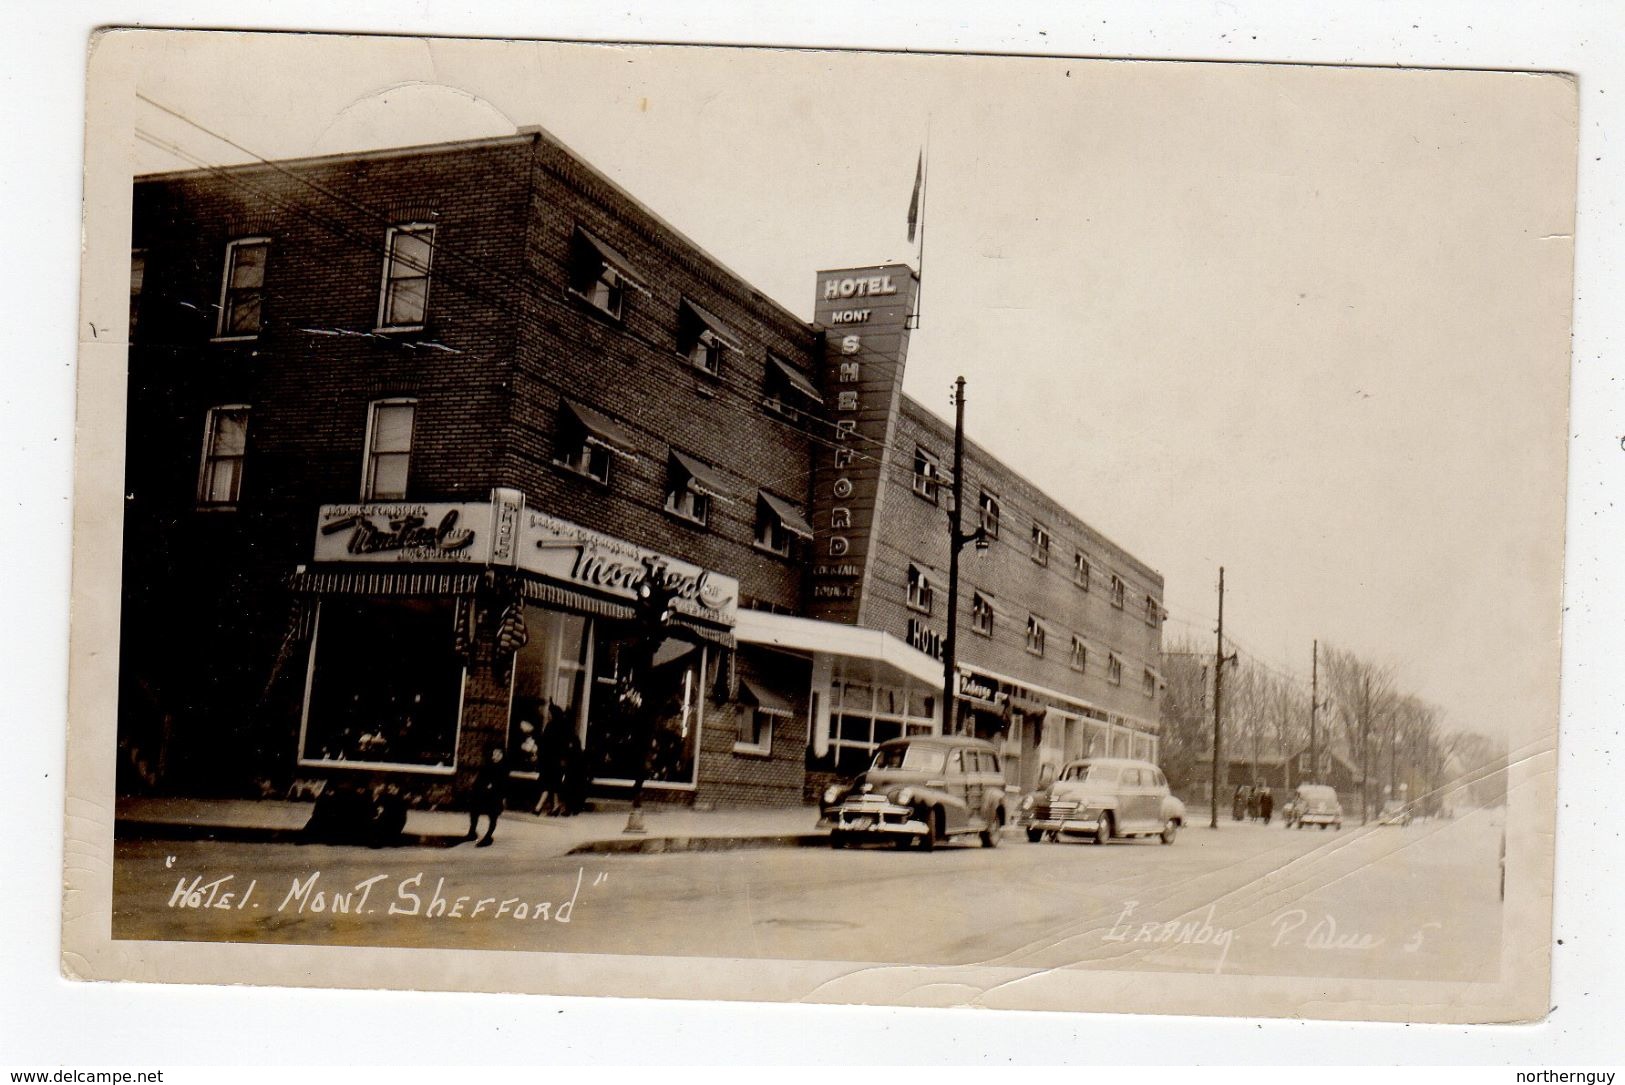 GRANBY, Quebec, Canada, Hotel Mont. Shefford, Montreal Shoe Store, 1959 RPPC - Granby